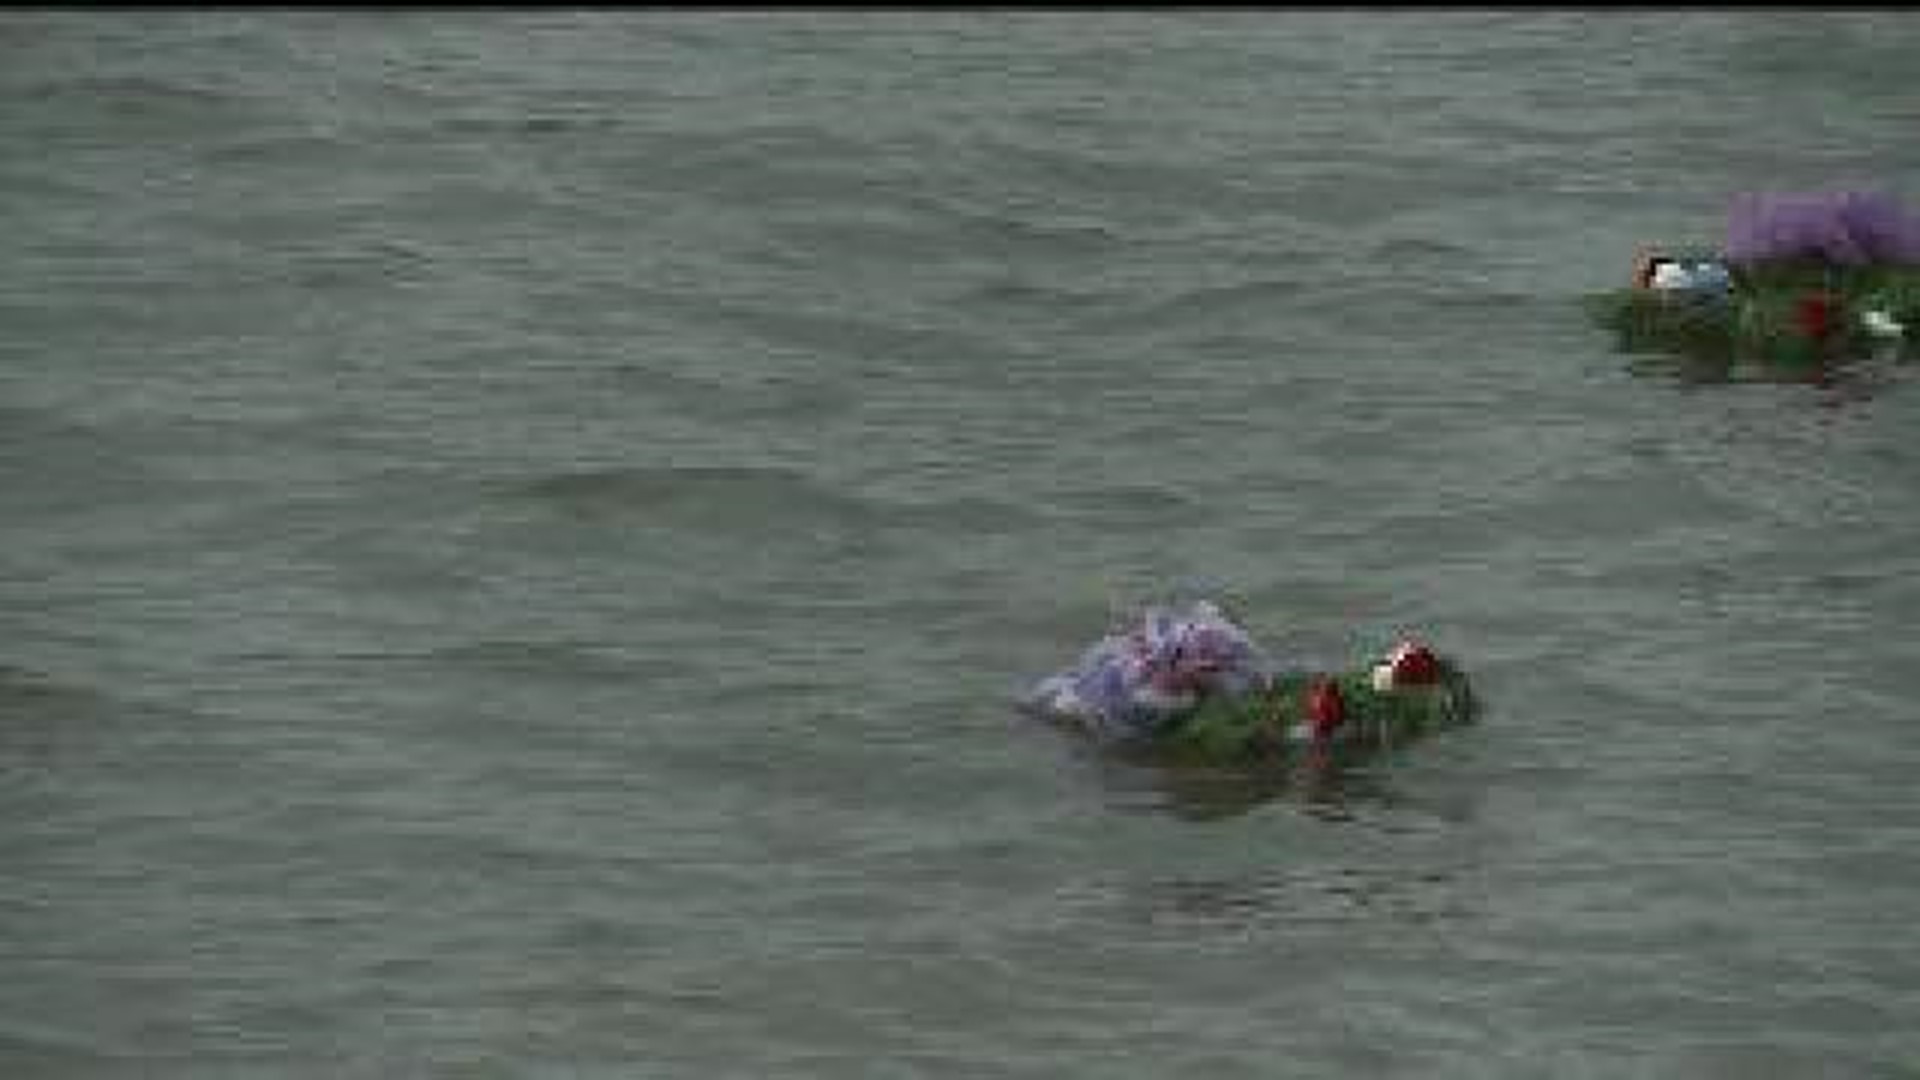 Wreaths tossed into river in honor of Hispanic servicemen and women